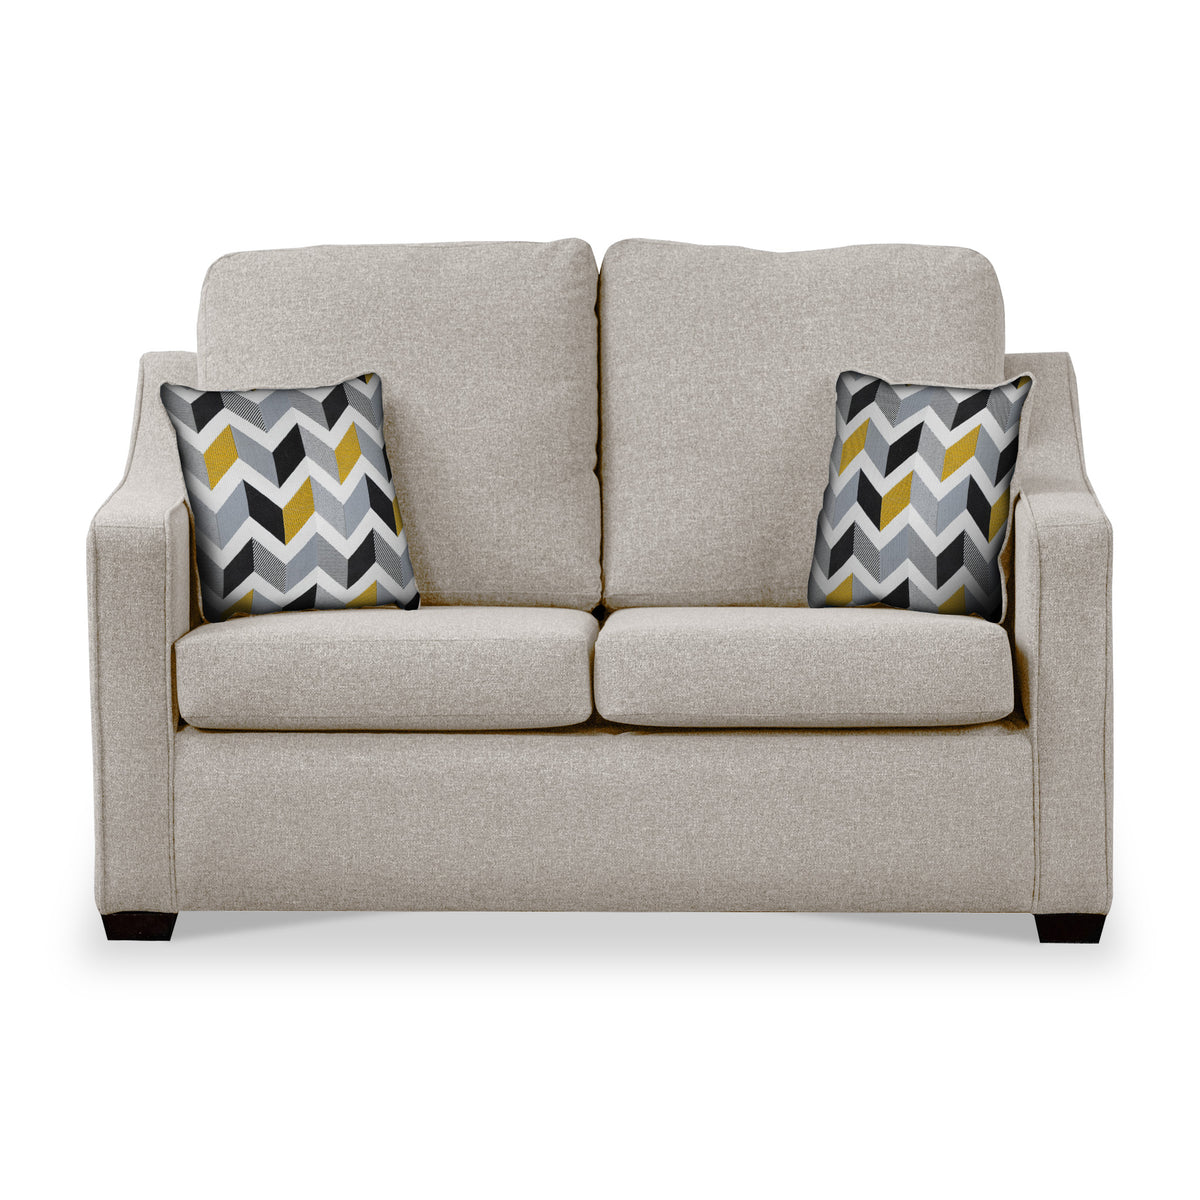 Fenton Oatmeal Soft Weave 2 Seater Sofabed with Mustard Scatter Cushions from Roseland Furniture